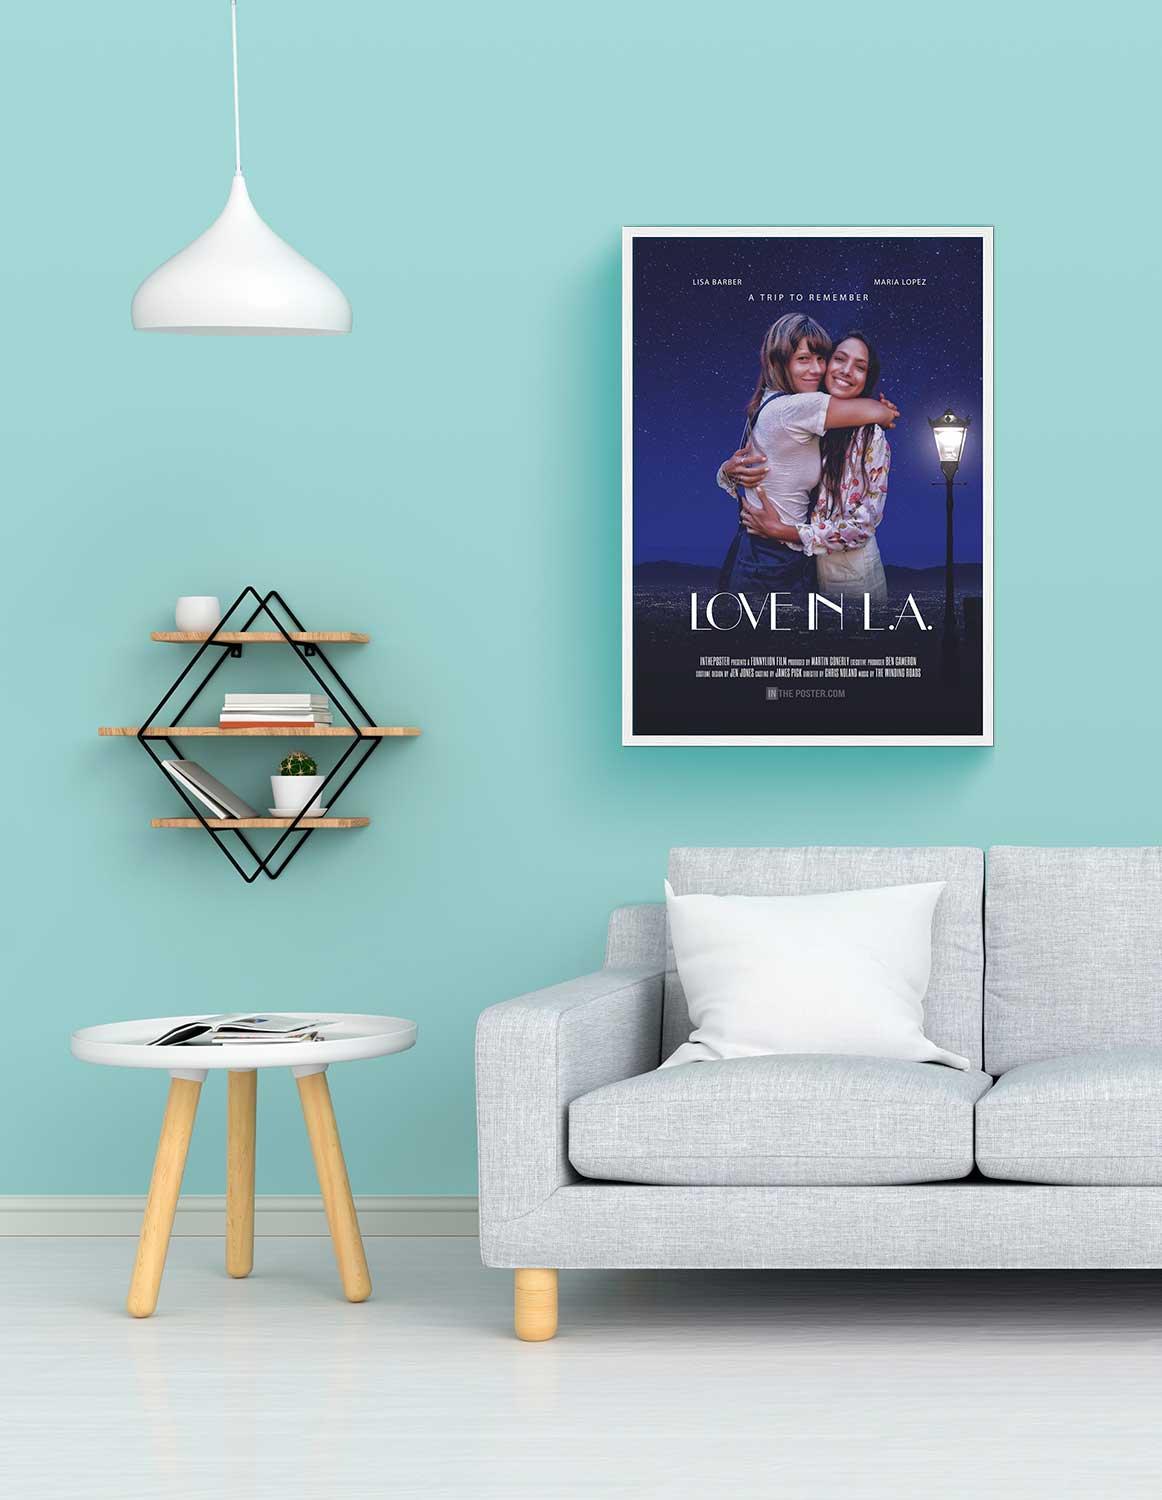 Love In LA romantic movie poster in a white frame, on the wall above a grey sofa